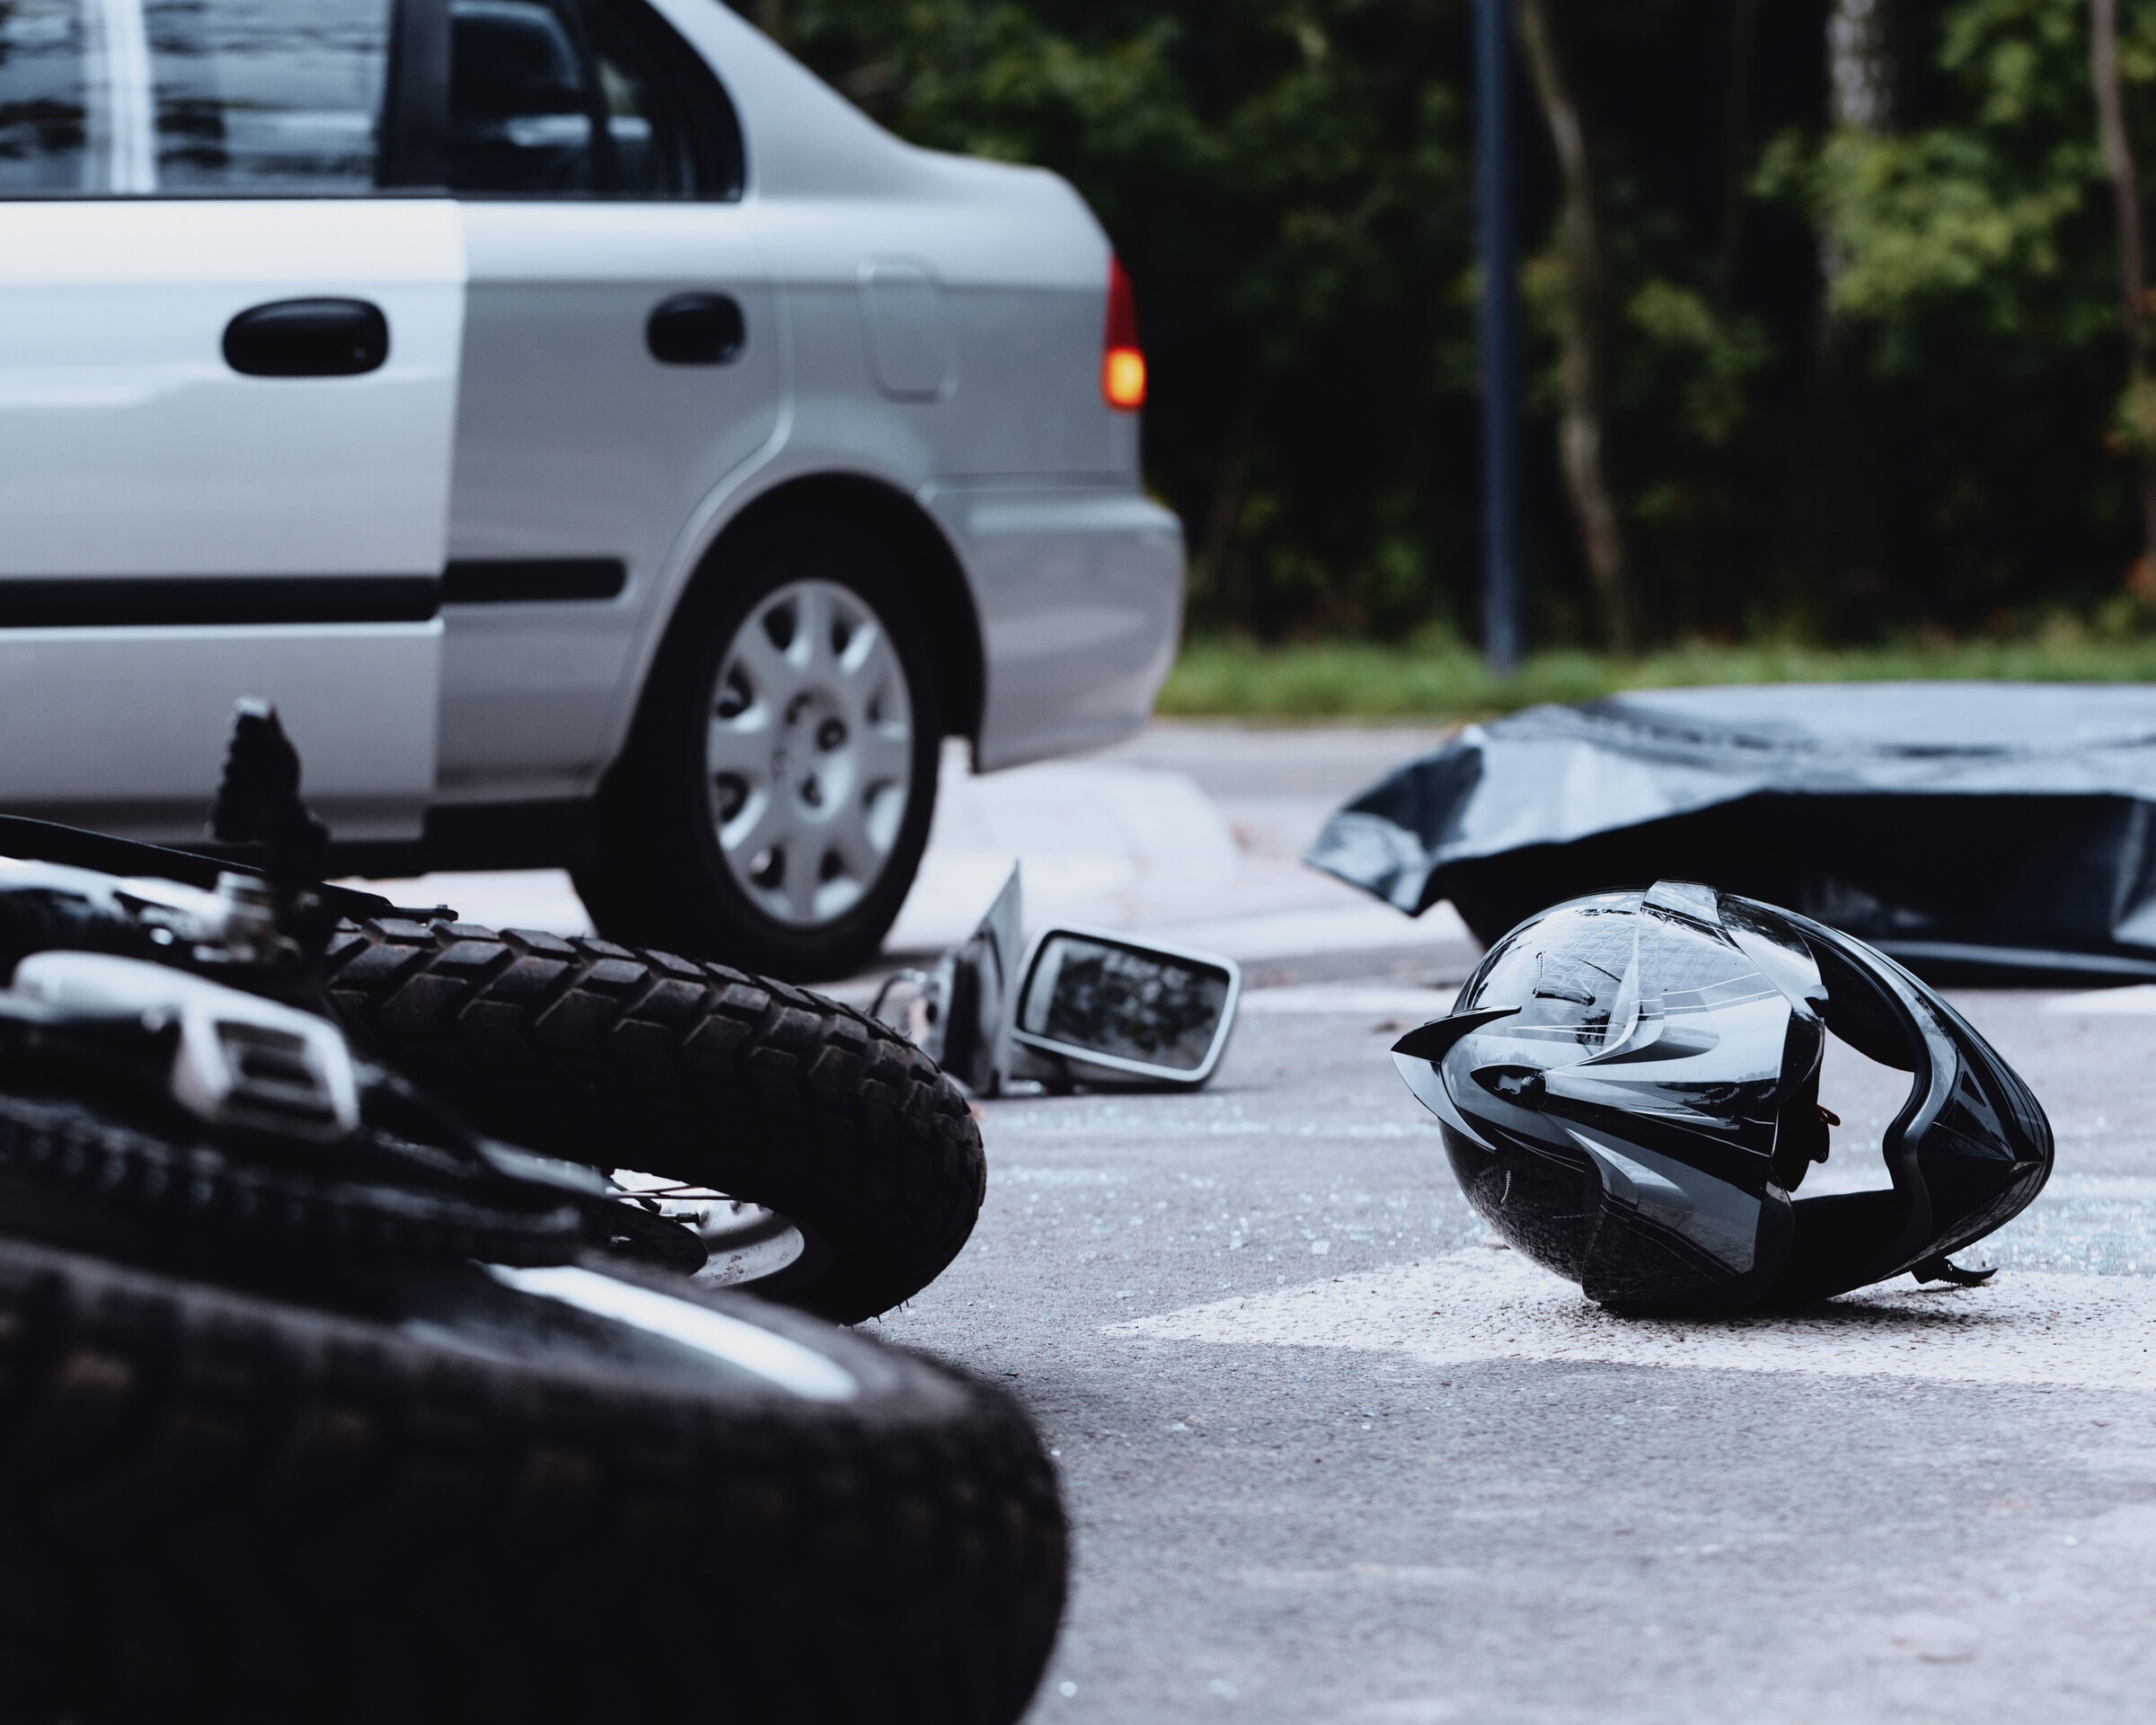 Reliable lawyers who are dedicated to providing support and guidance to those affected by car and motor vehicle accidents in Arlington